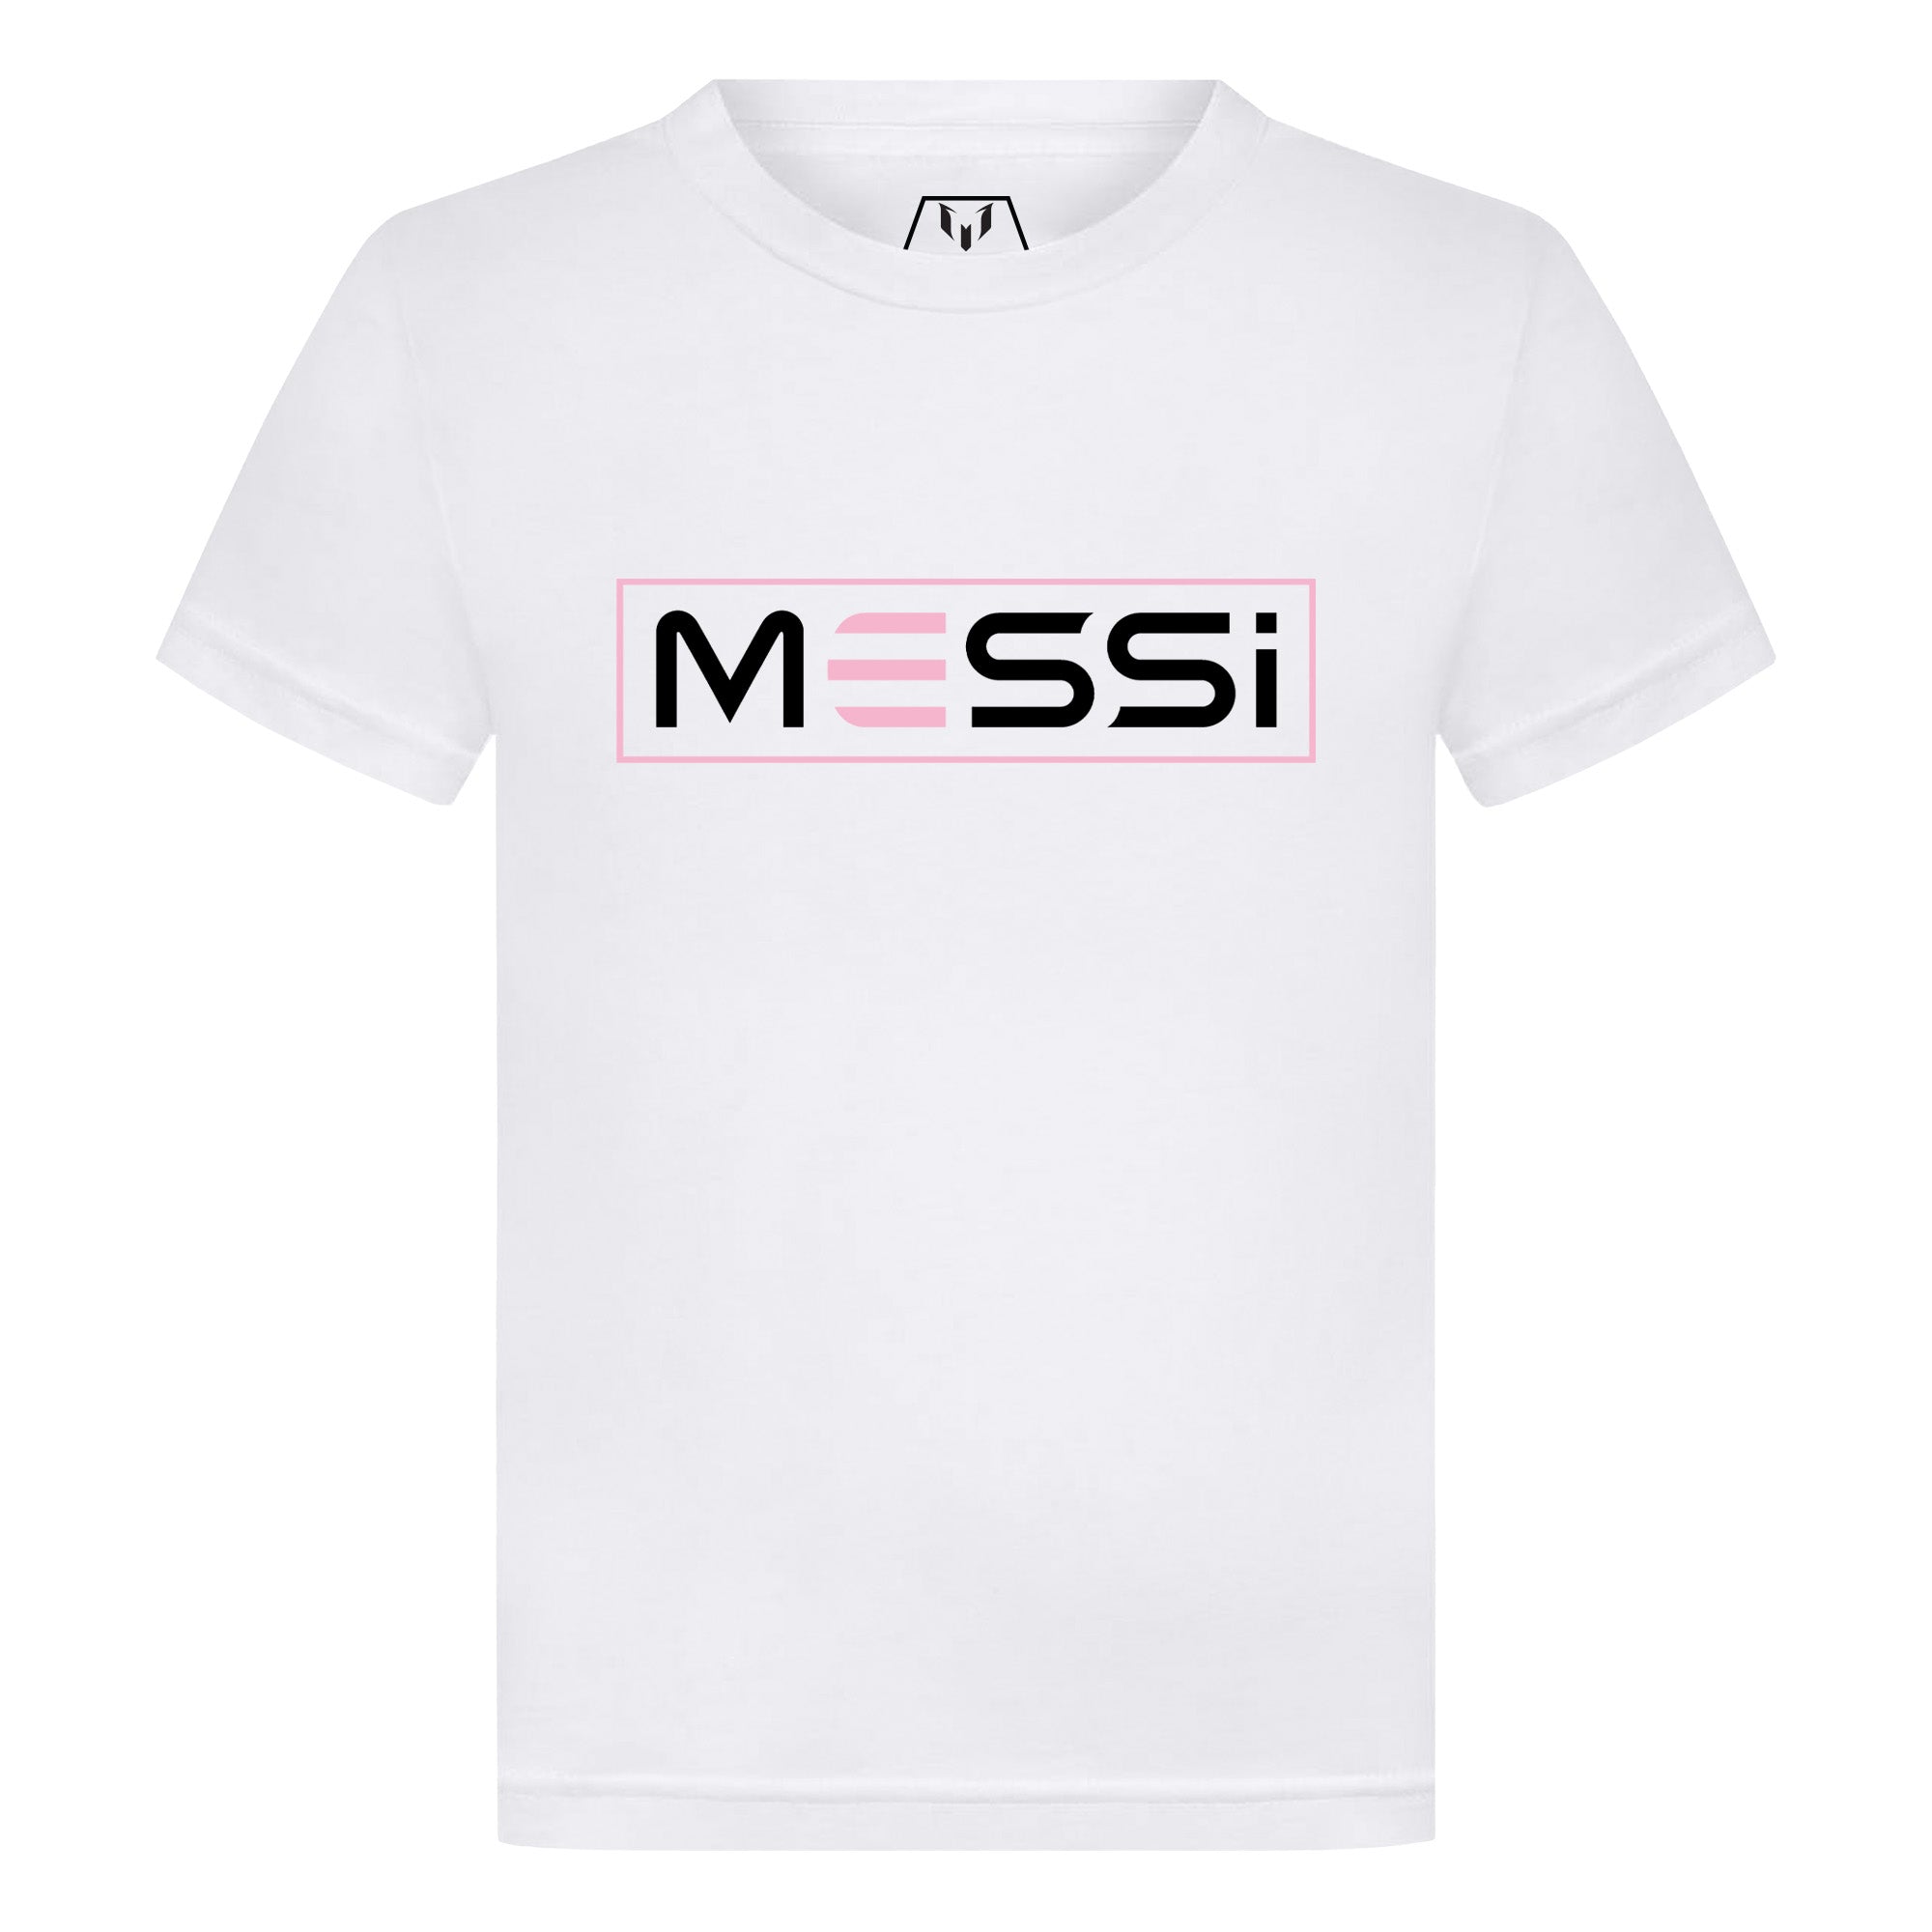 The Messi Effect Kid's Graphic T-Shirt